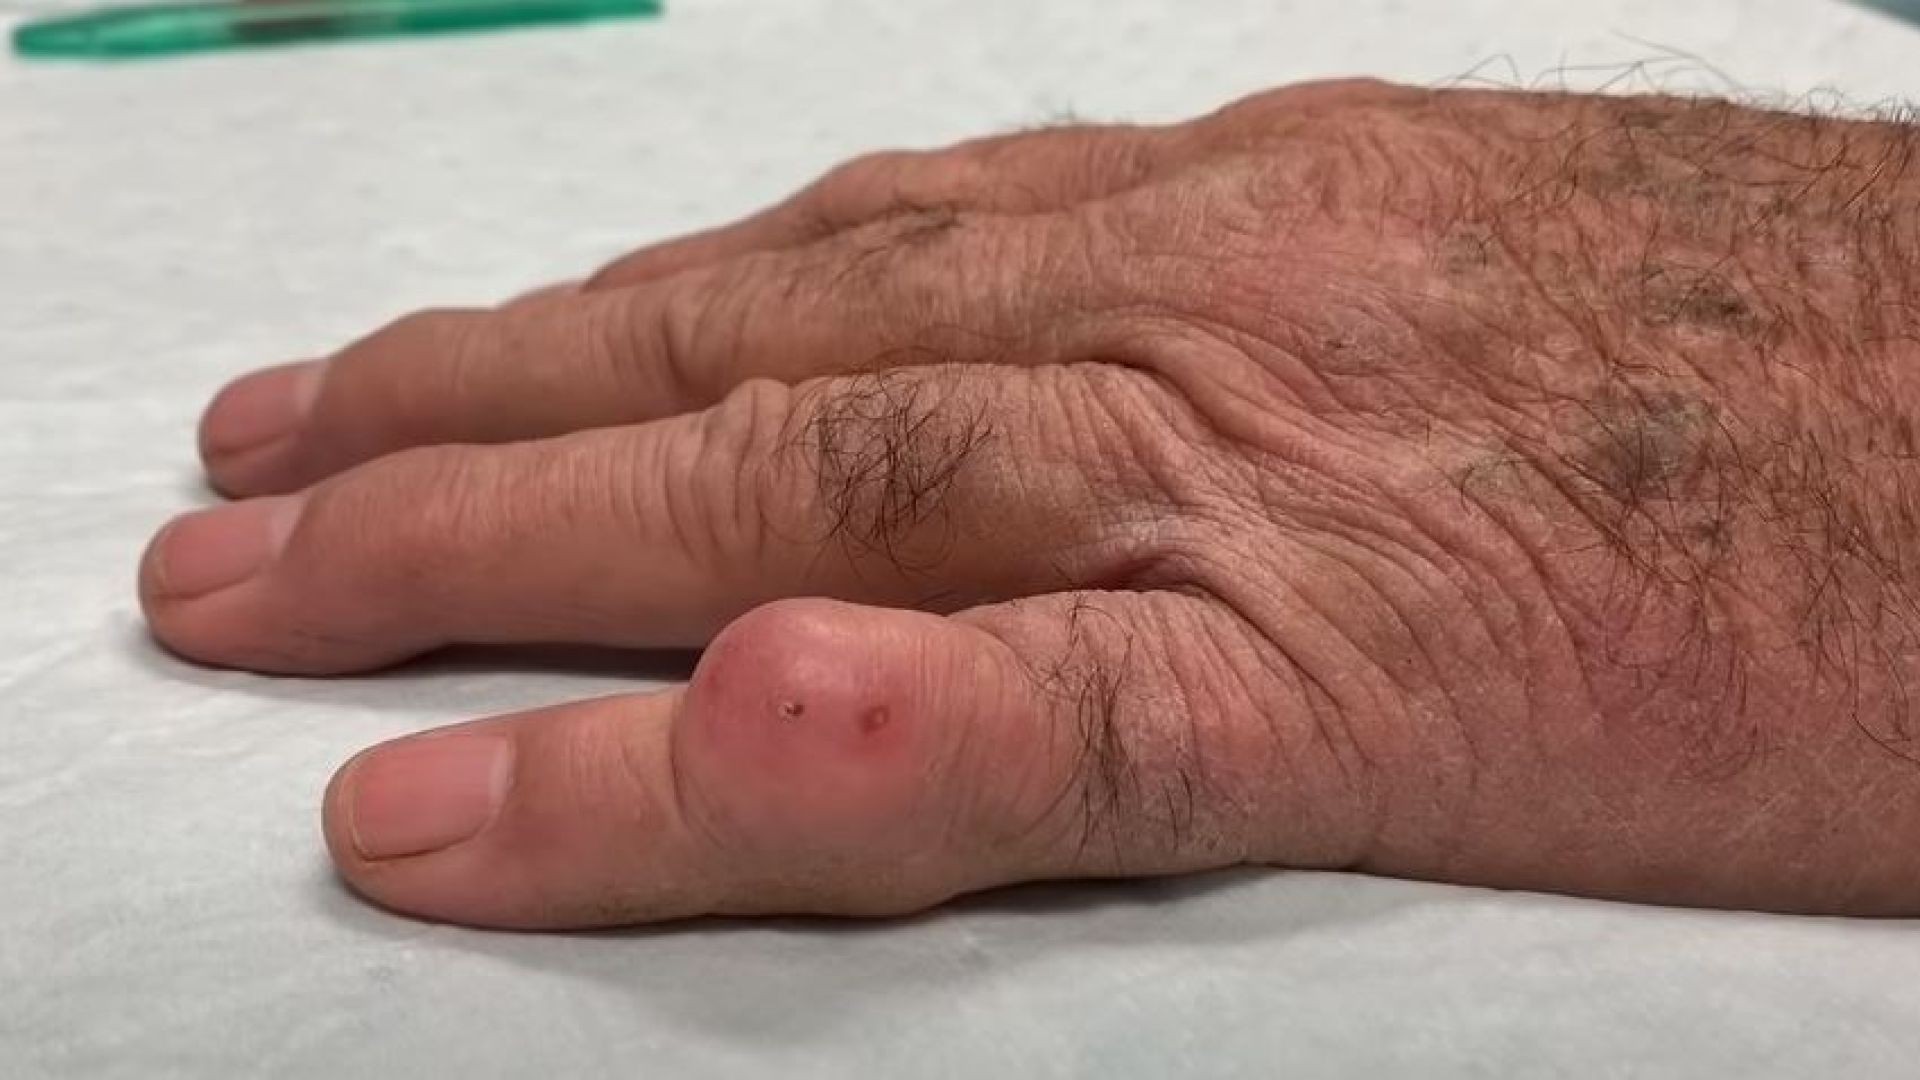 Inclusion cyst in the finger